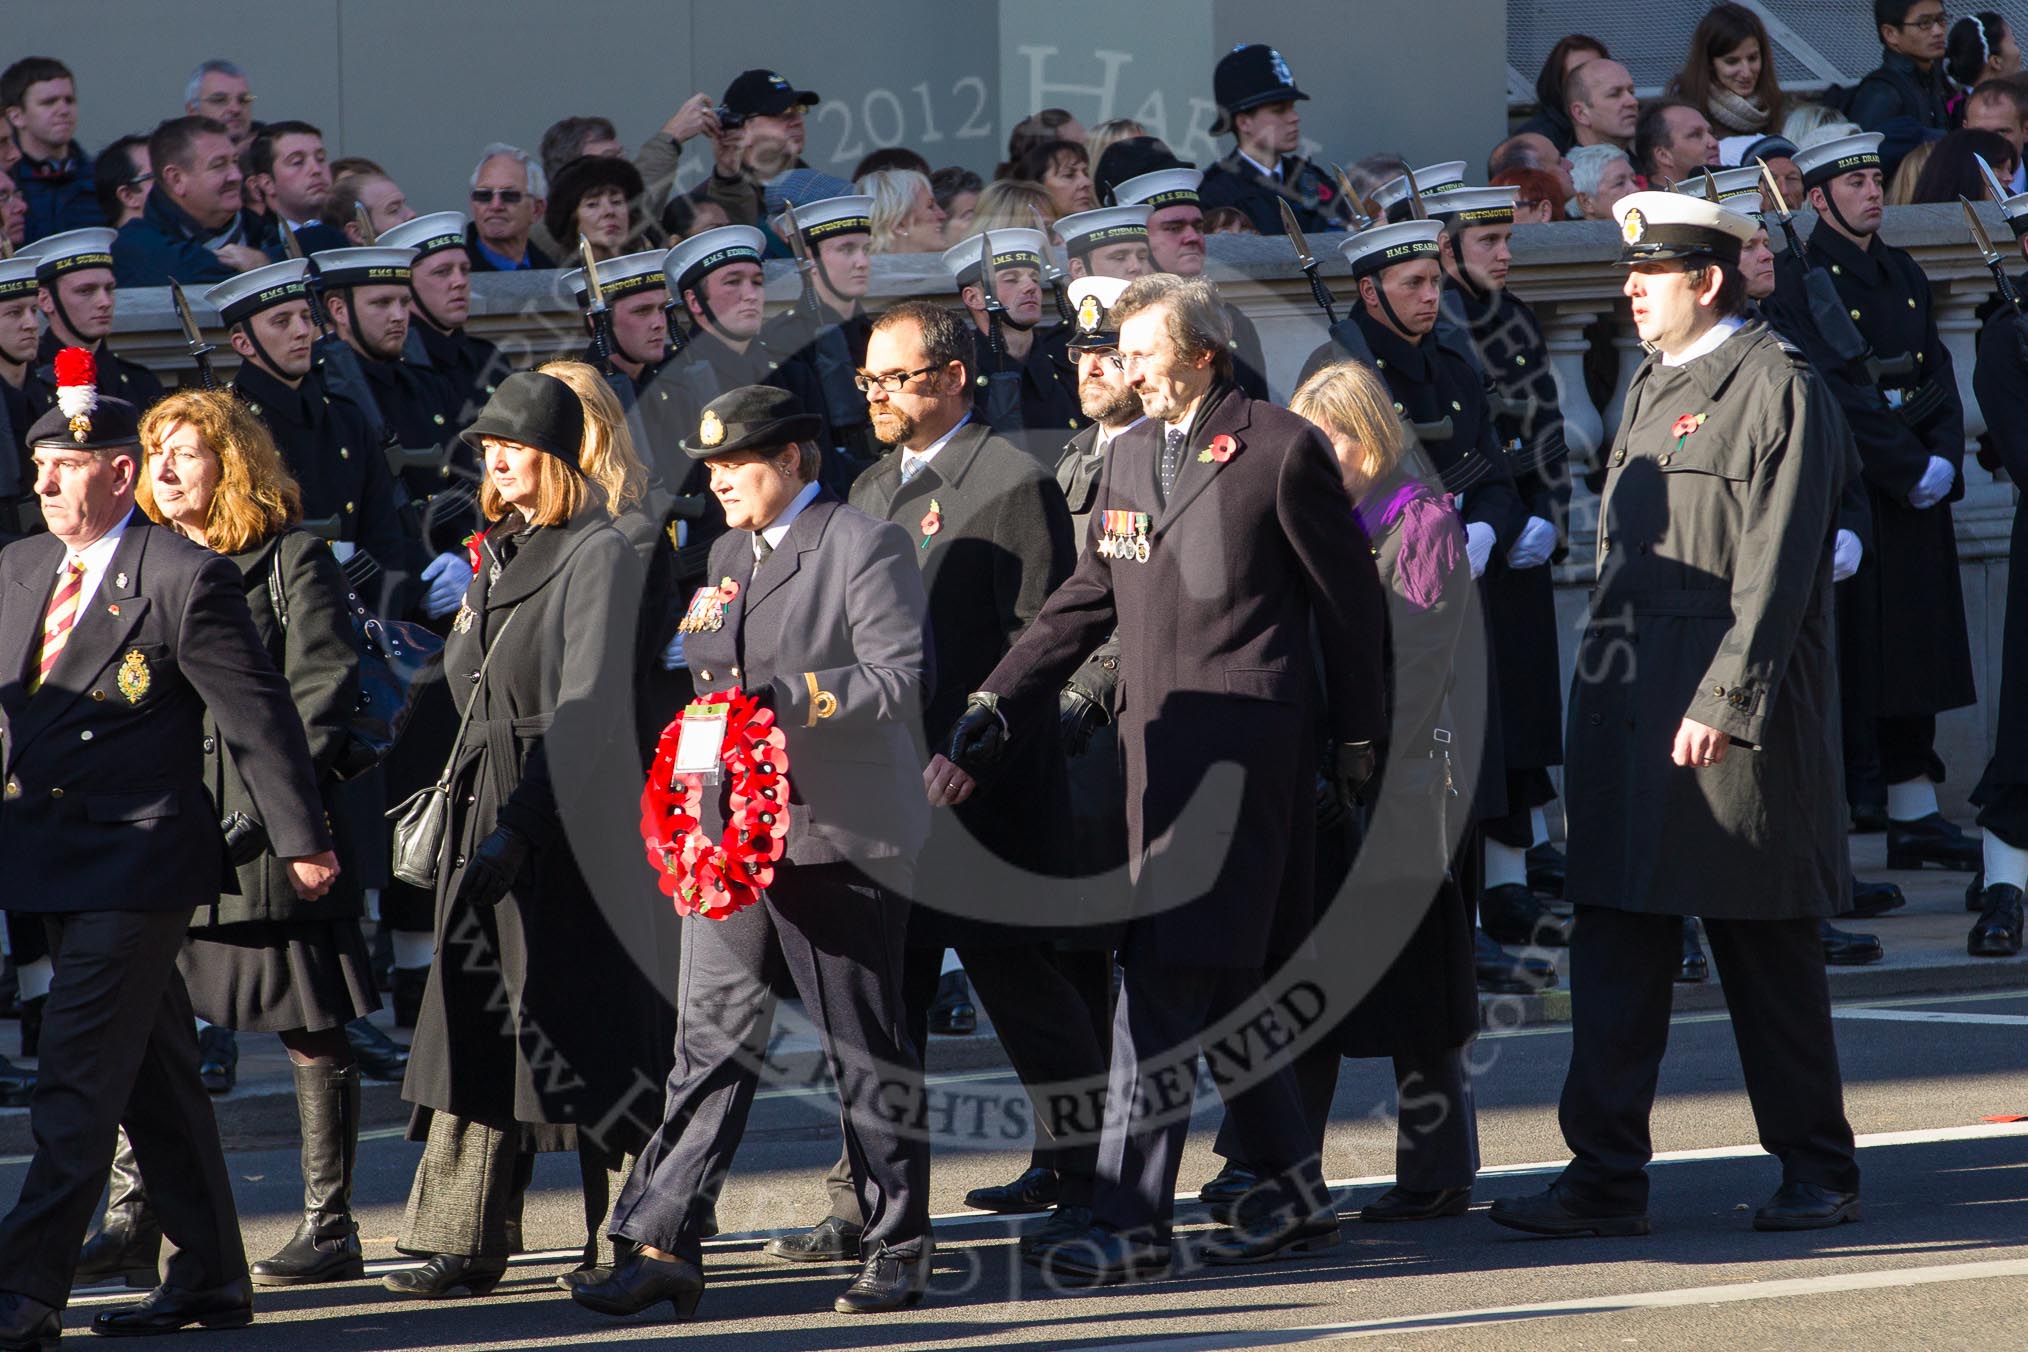 Remembrance Sunday 2012 Cenotaph March Past: Unlisted group - information appreciated!.
Whitehall, Cenotaph,
London SW1,

United Kingdom,
on 11 November 2012 at 12:16, image #1765